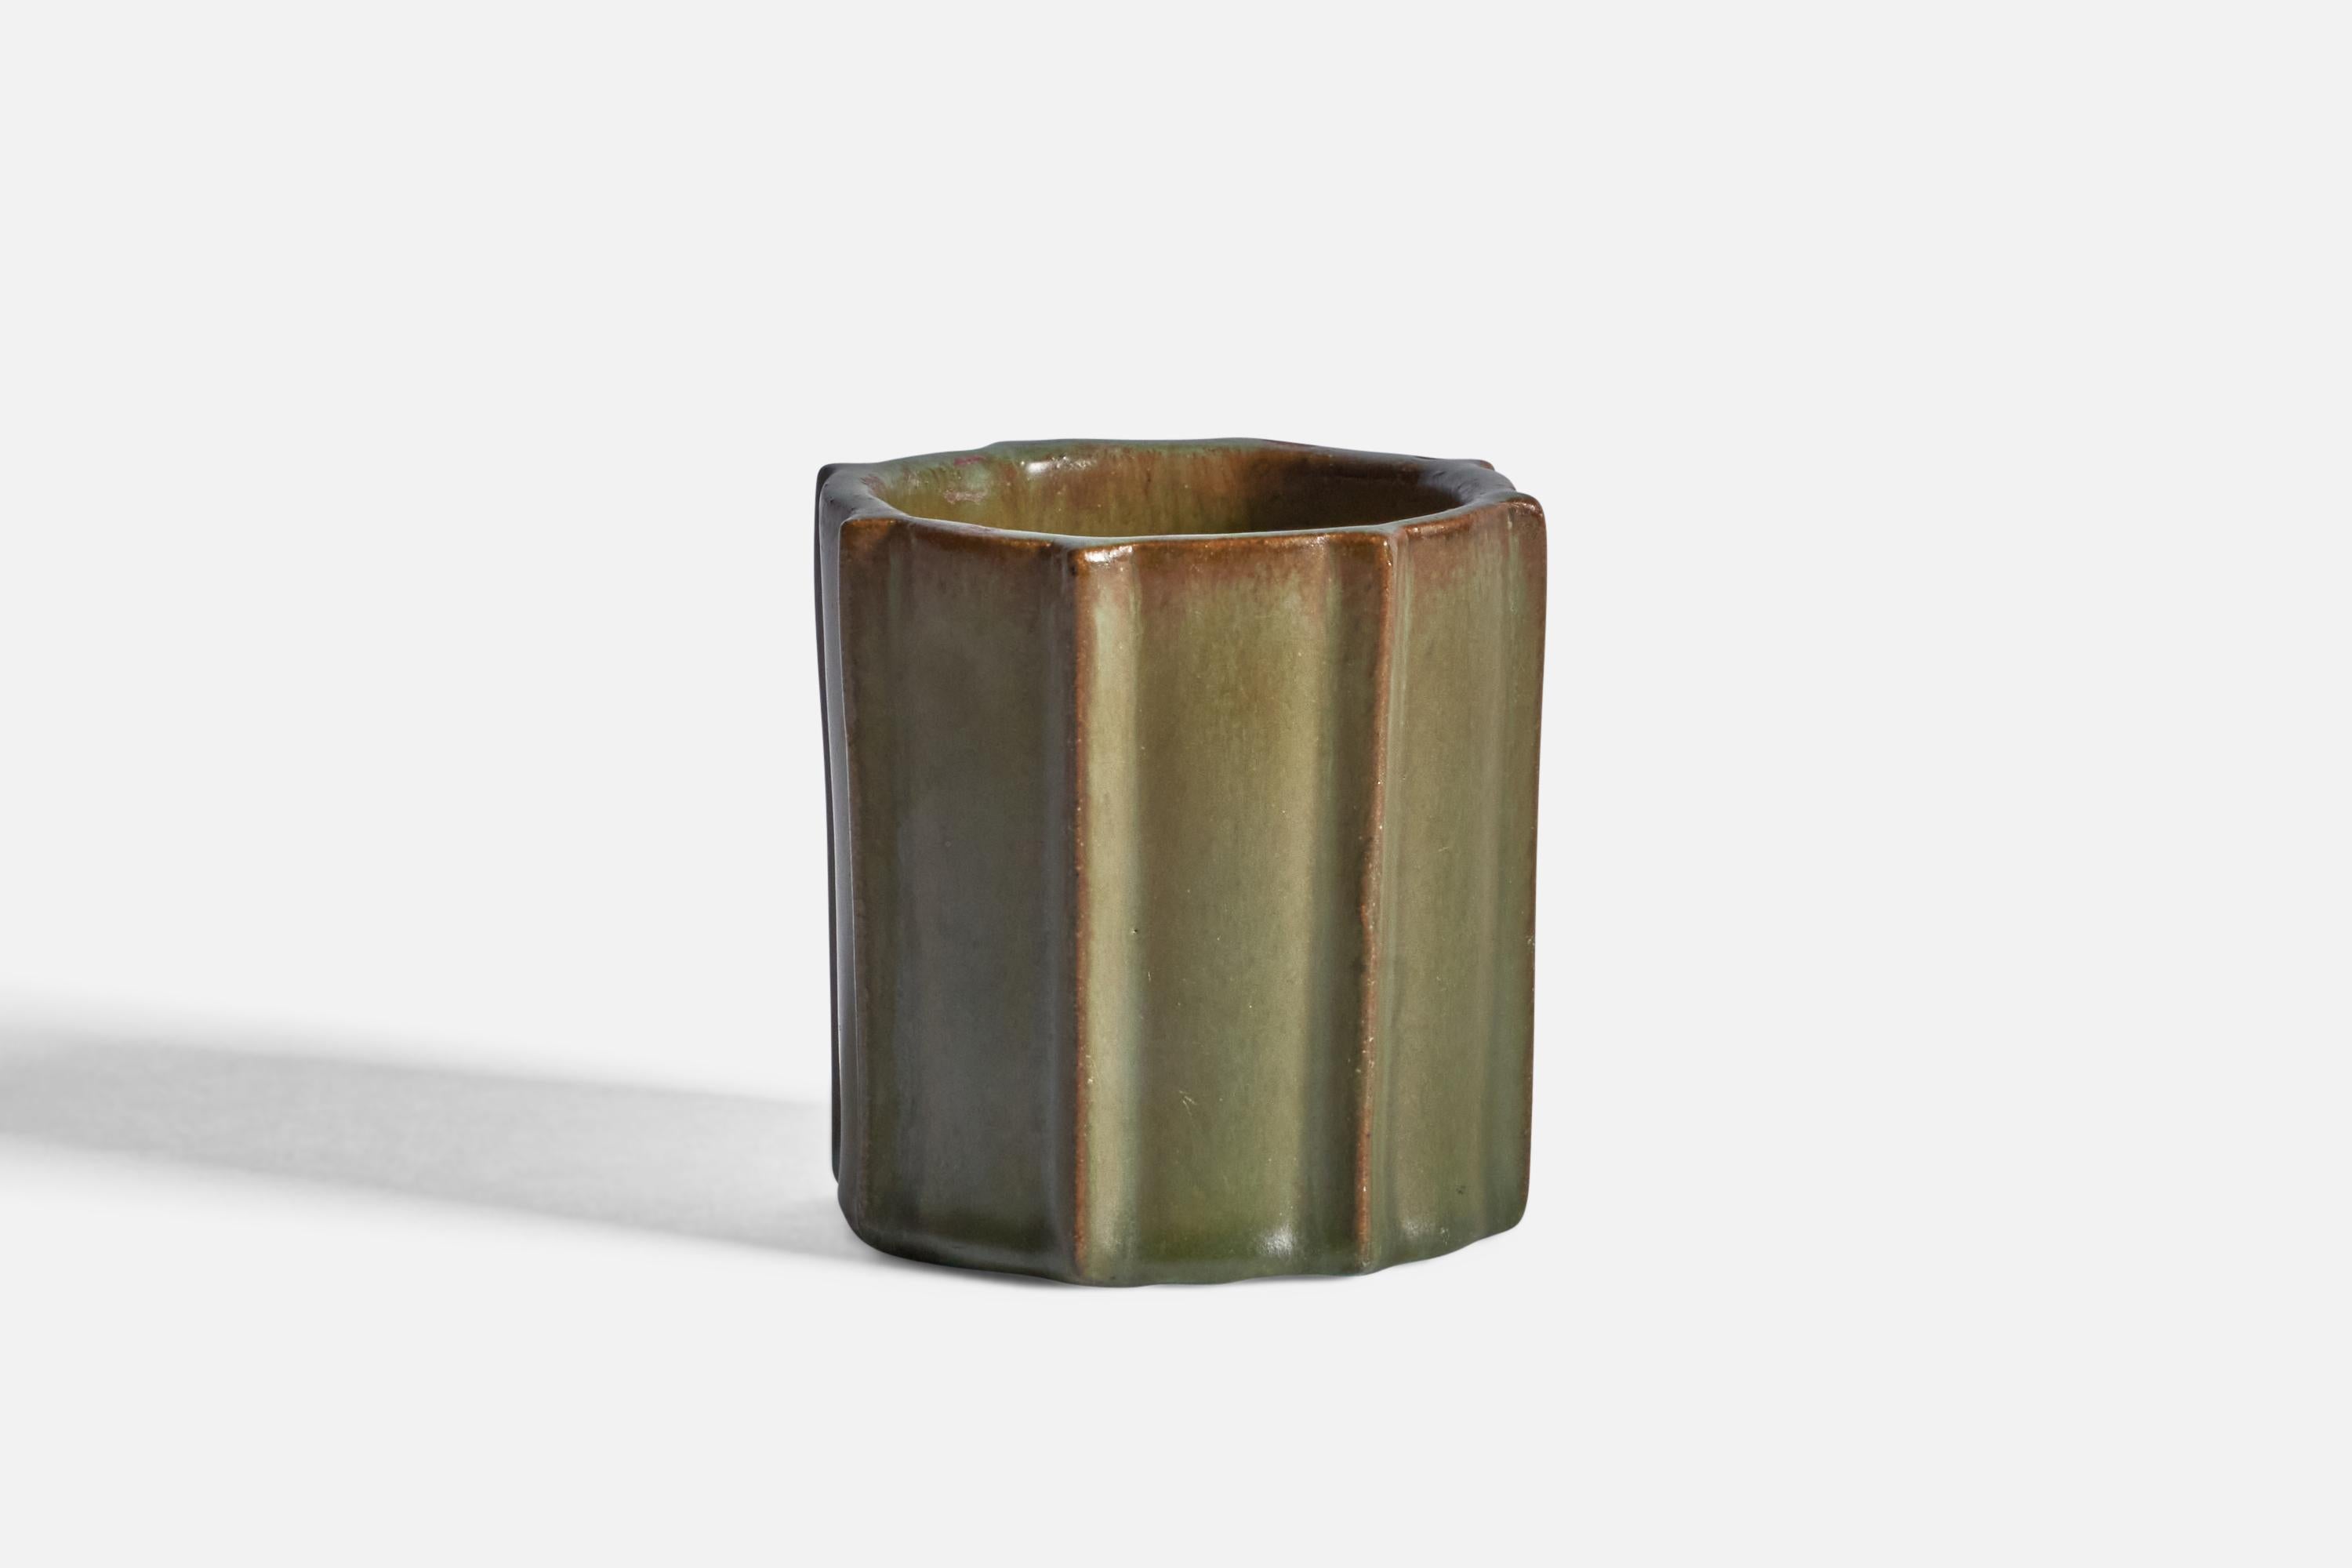 A fluted, green-glazed stoneware vase, designed and produced in Denmark, c. 1940s.